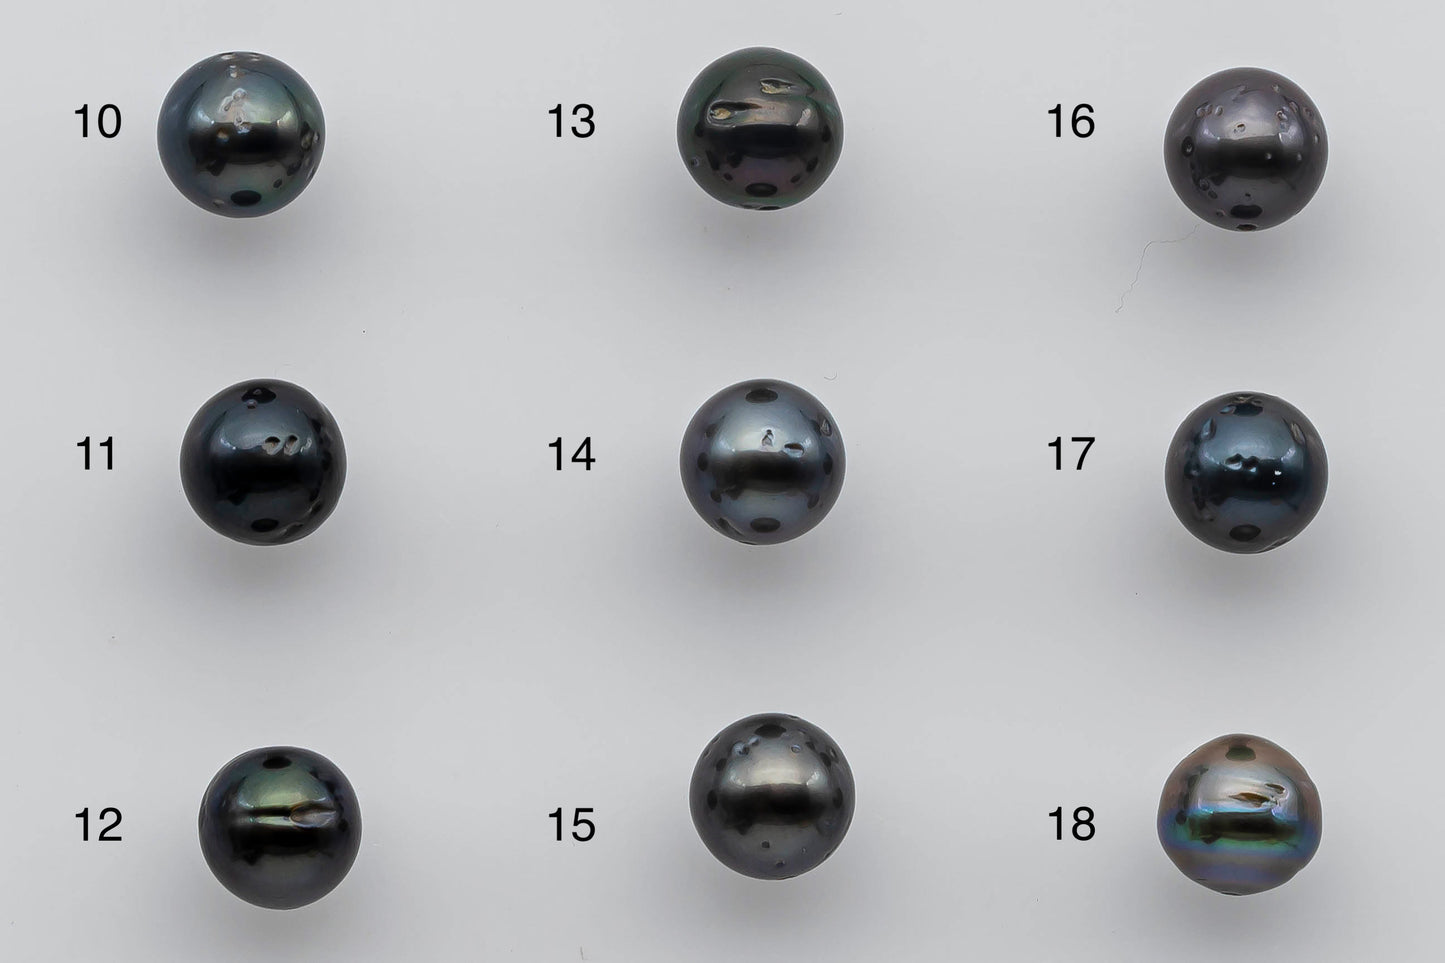 7-8mm Tahitian Pearl Loose Round with High Luster and Natural Colors with Blemishes in Single Piece Predrilled Hole, SKU # 1373TH